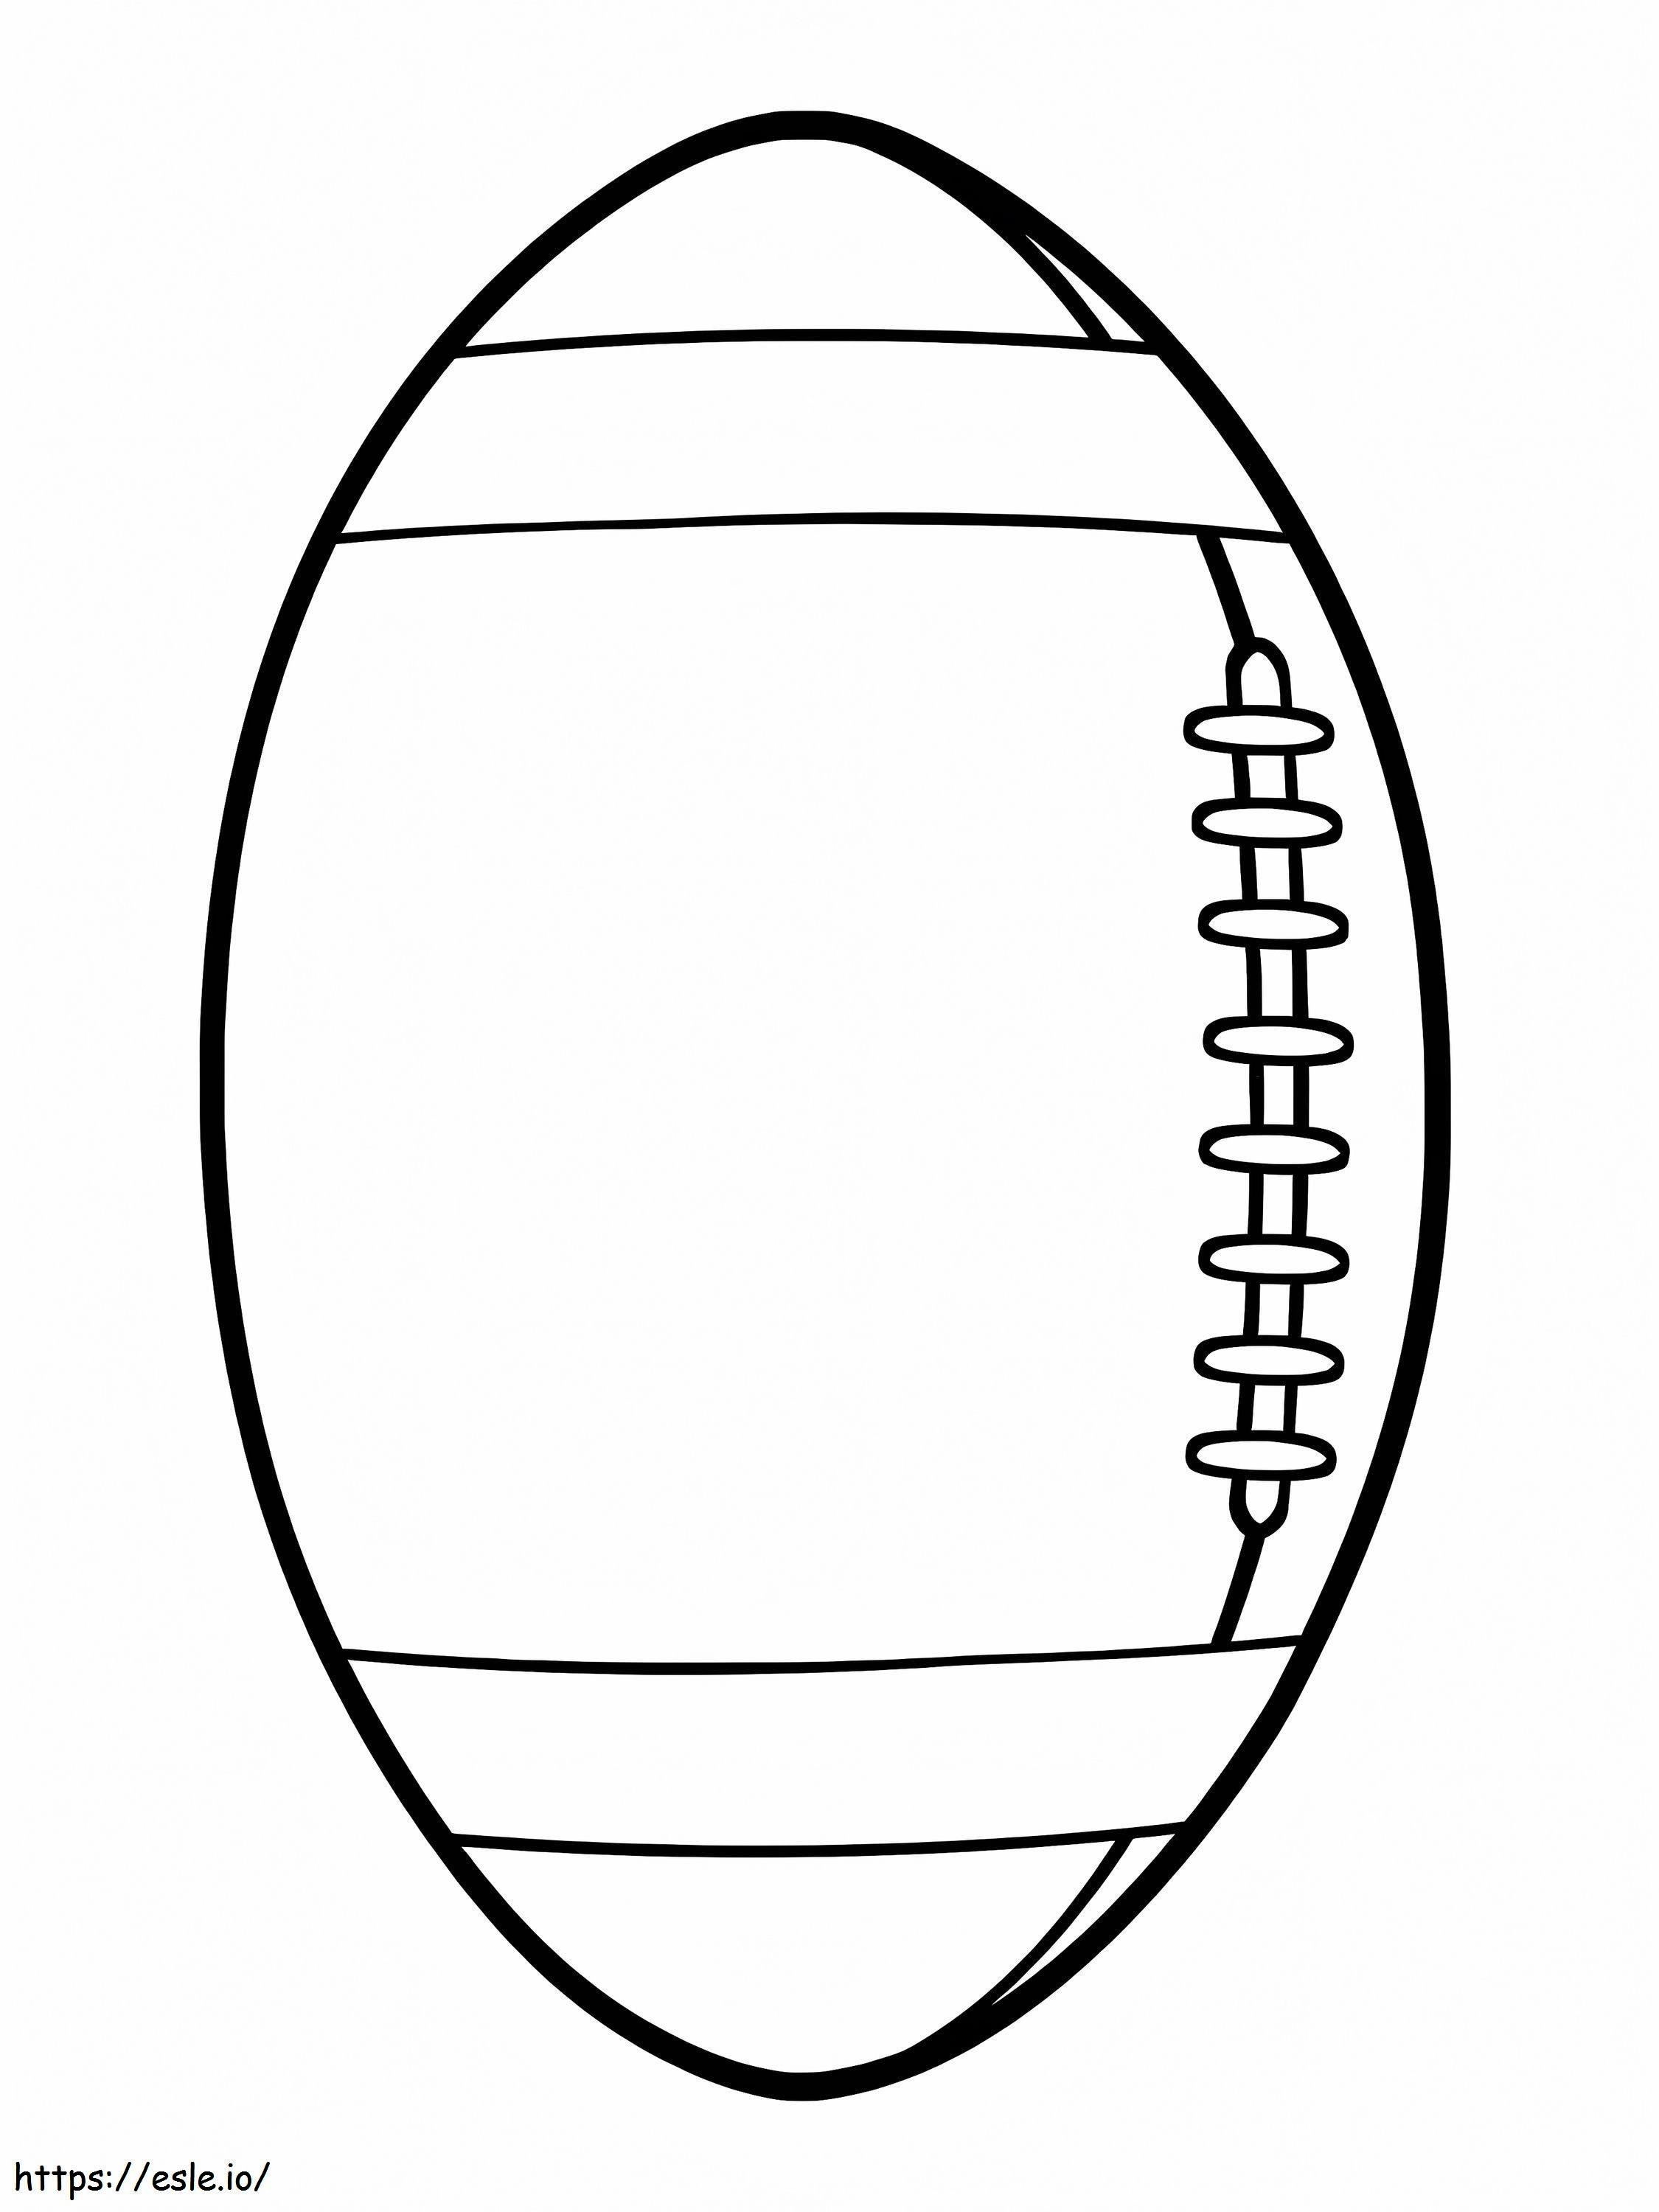 Free American Football Ball coloring page